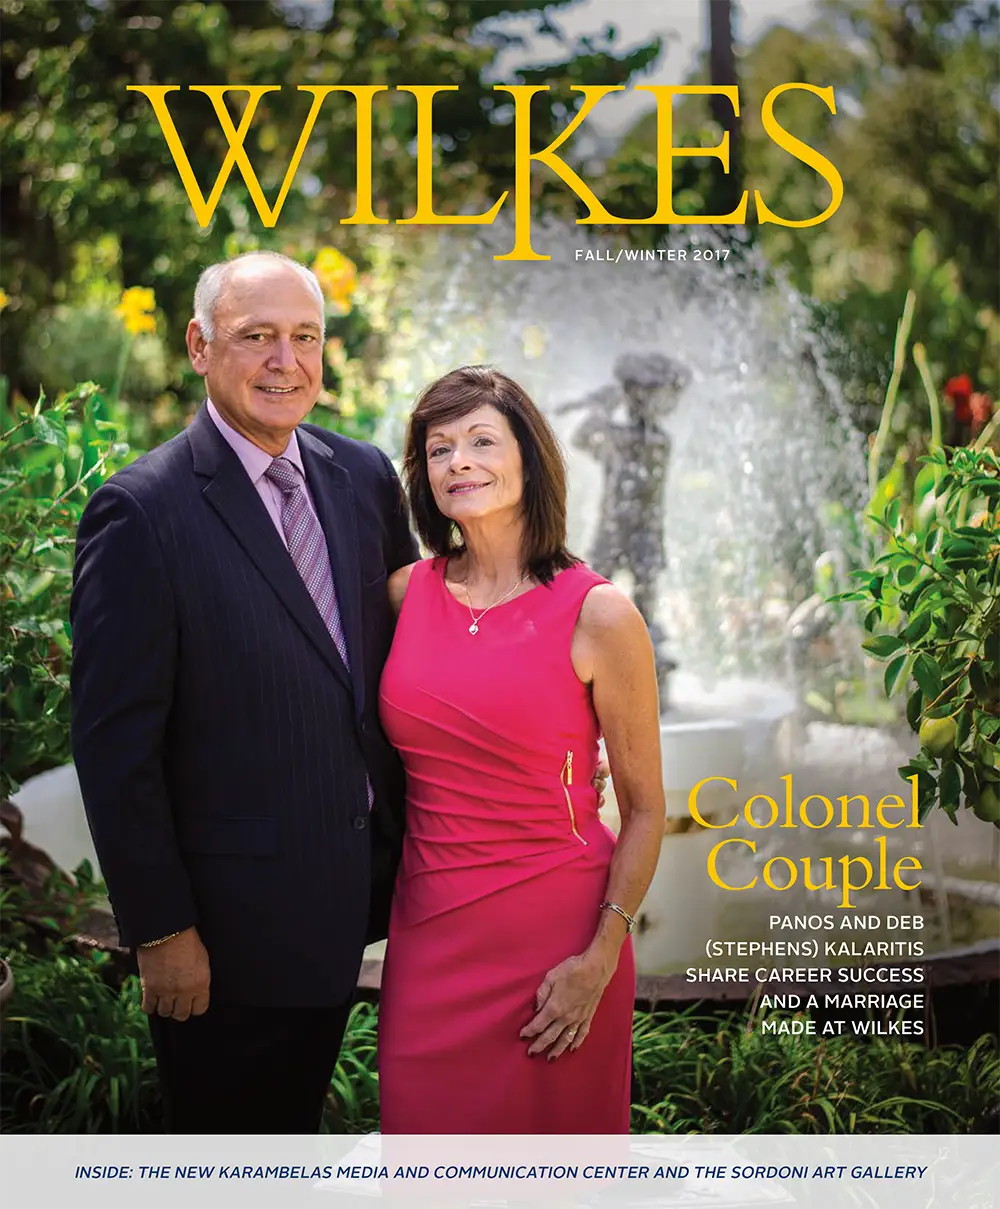 Wilkes Magazine Cover Fall/Winter 2017